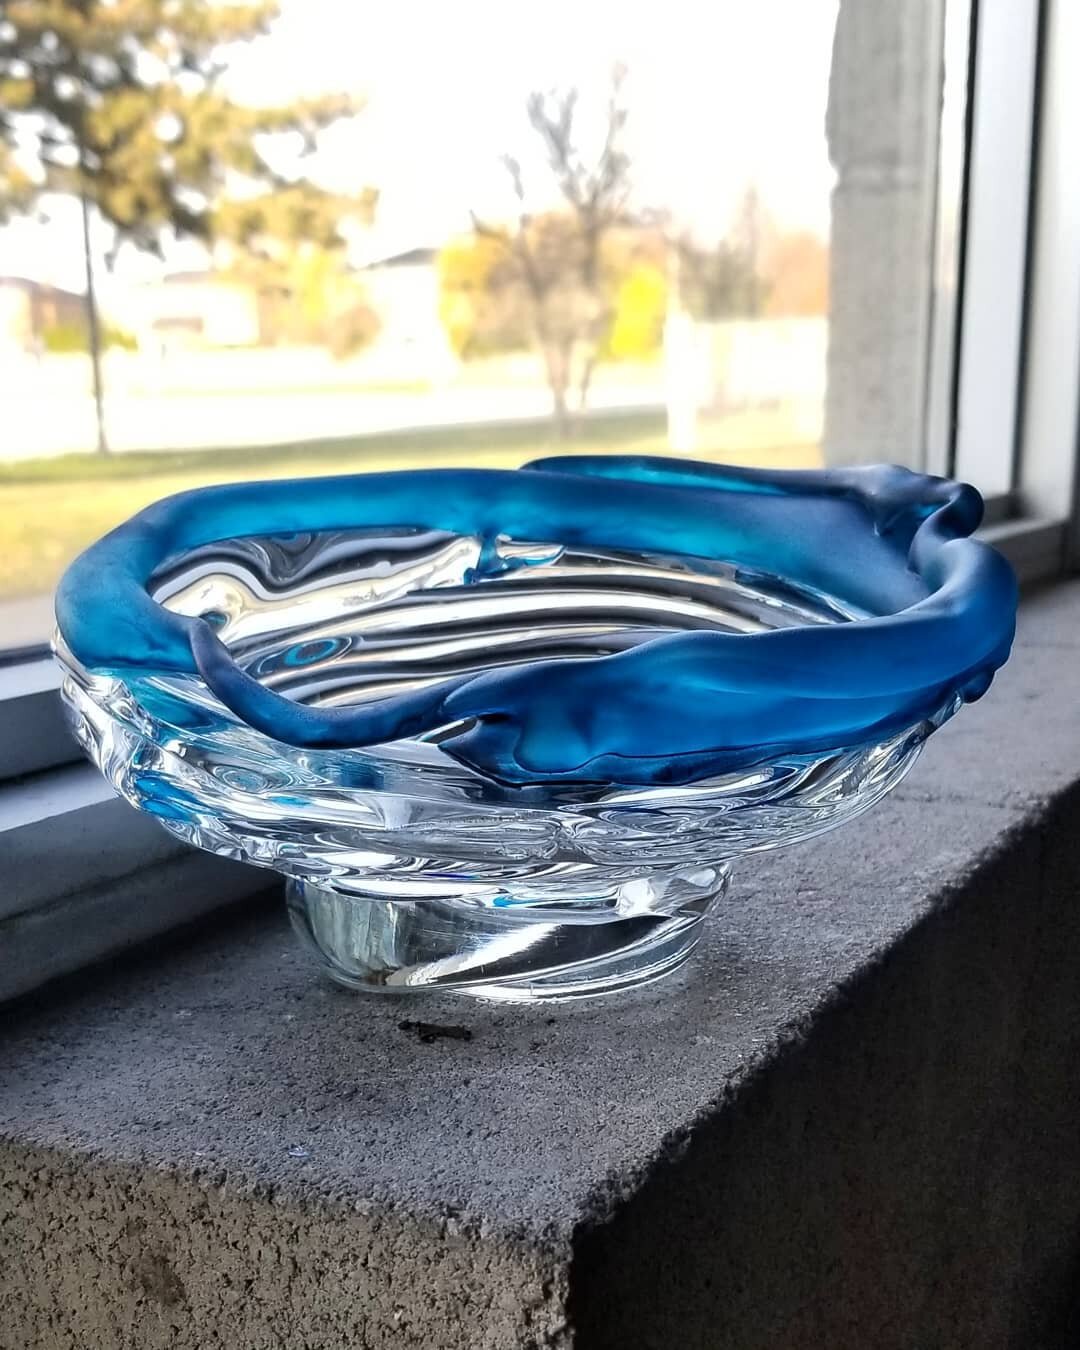 Finished shot of that coily bowl I was working on in the hotshop a little while ago! A close family friend is moving out to Alberta soon and we thought he would like some glass for his new space. Swipe to see that nice, velvety texture the paint crea